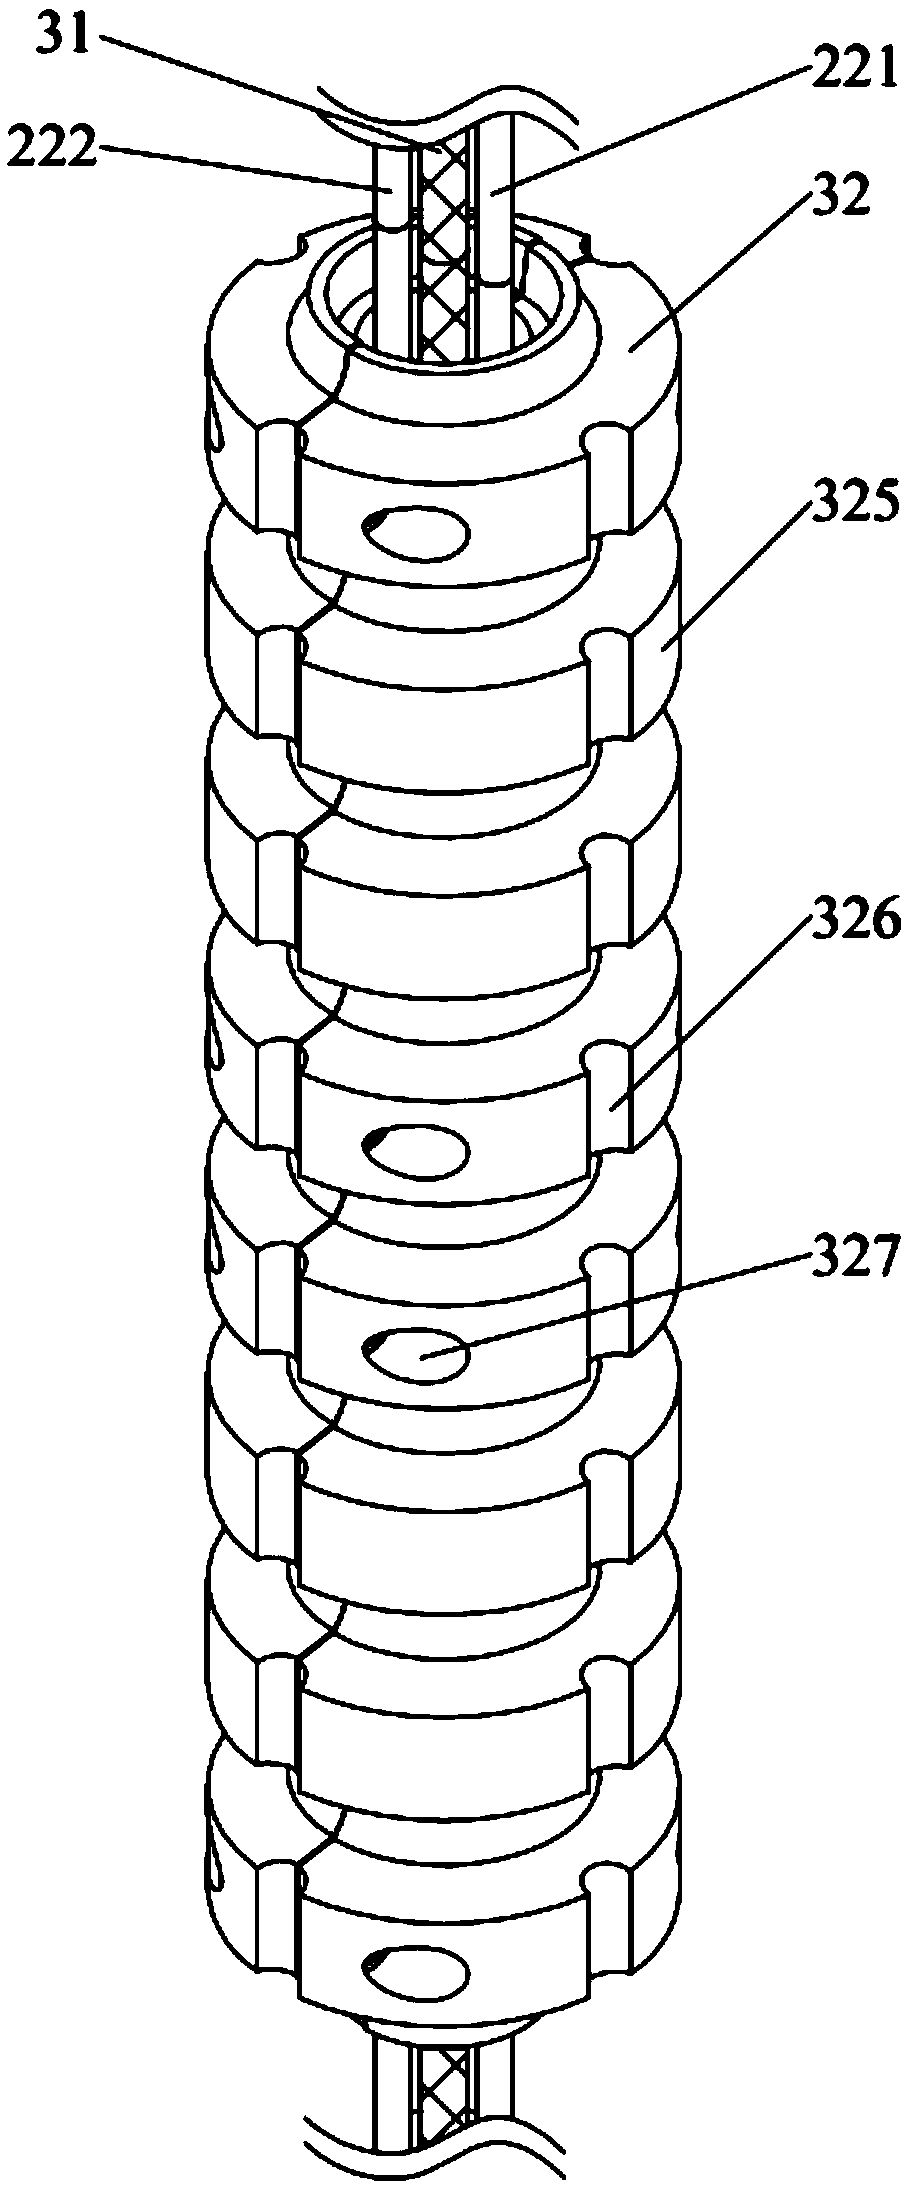 A seabed static penetration penetration device and its control method